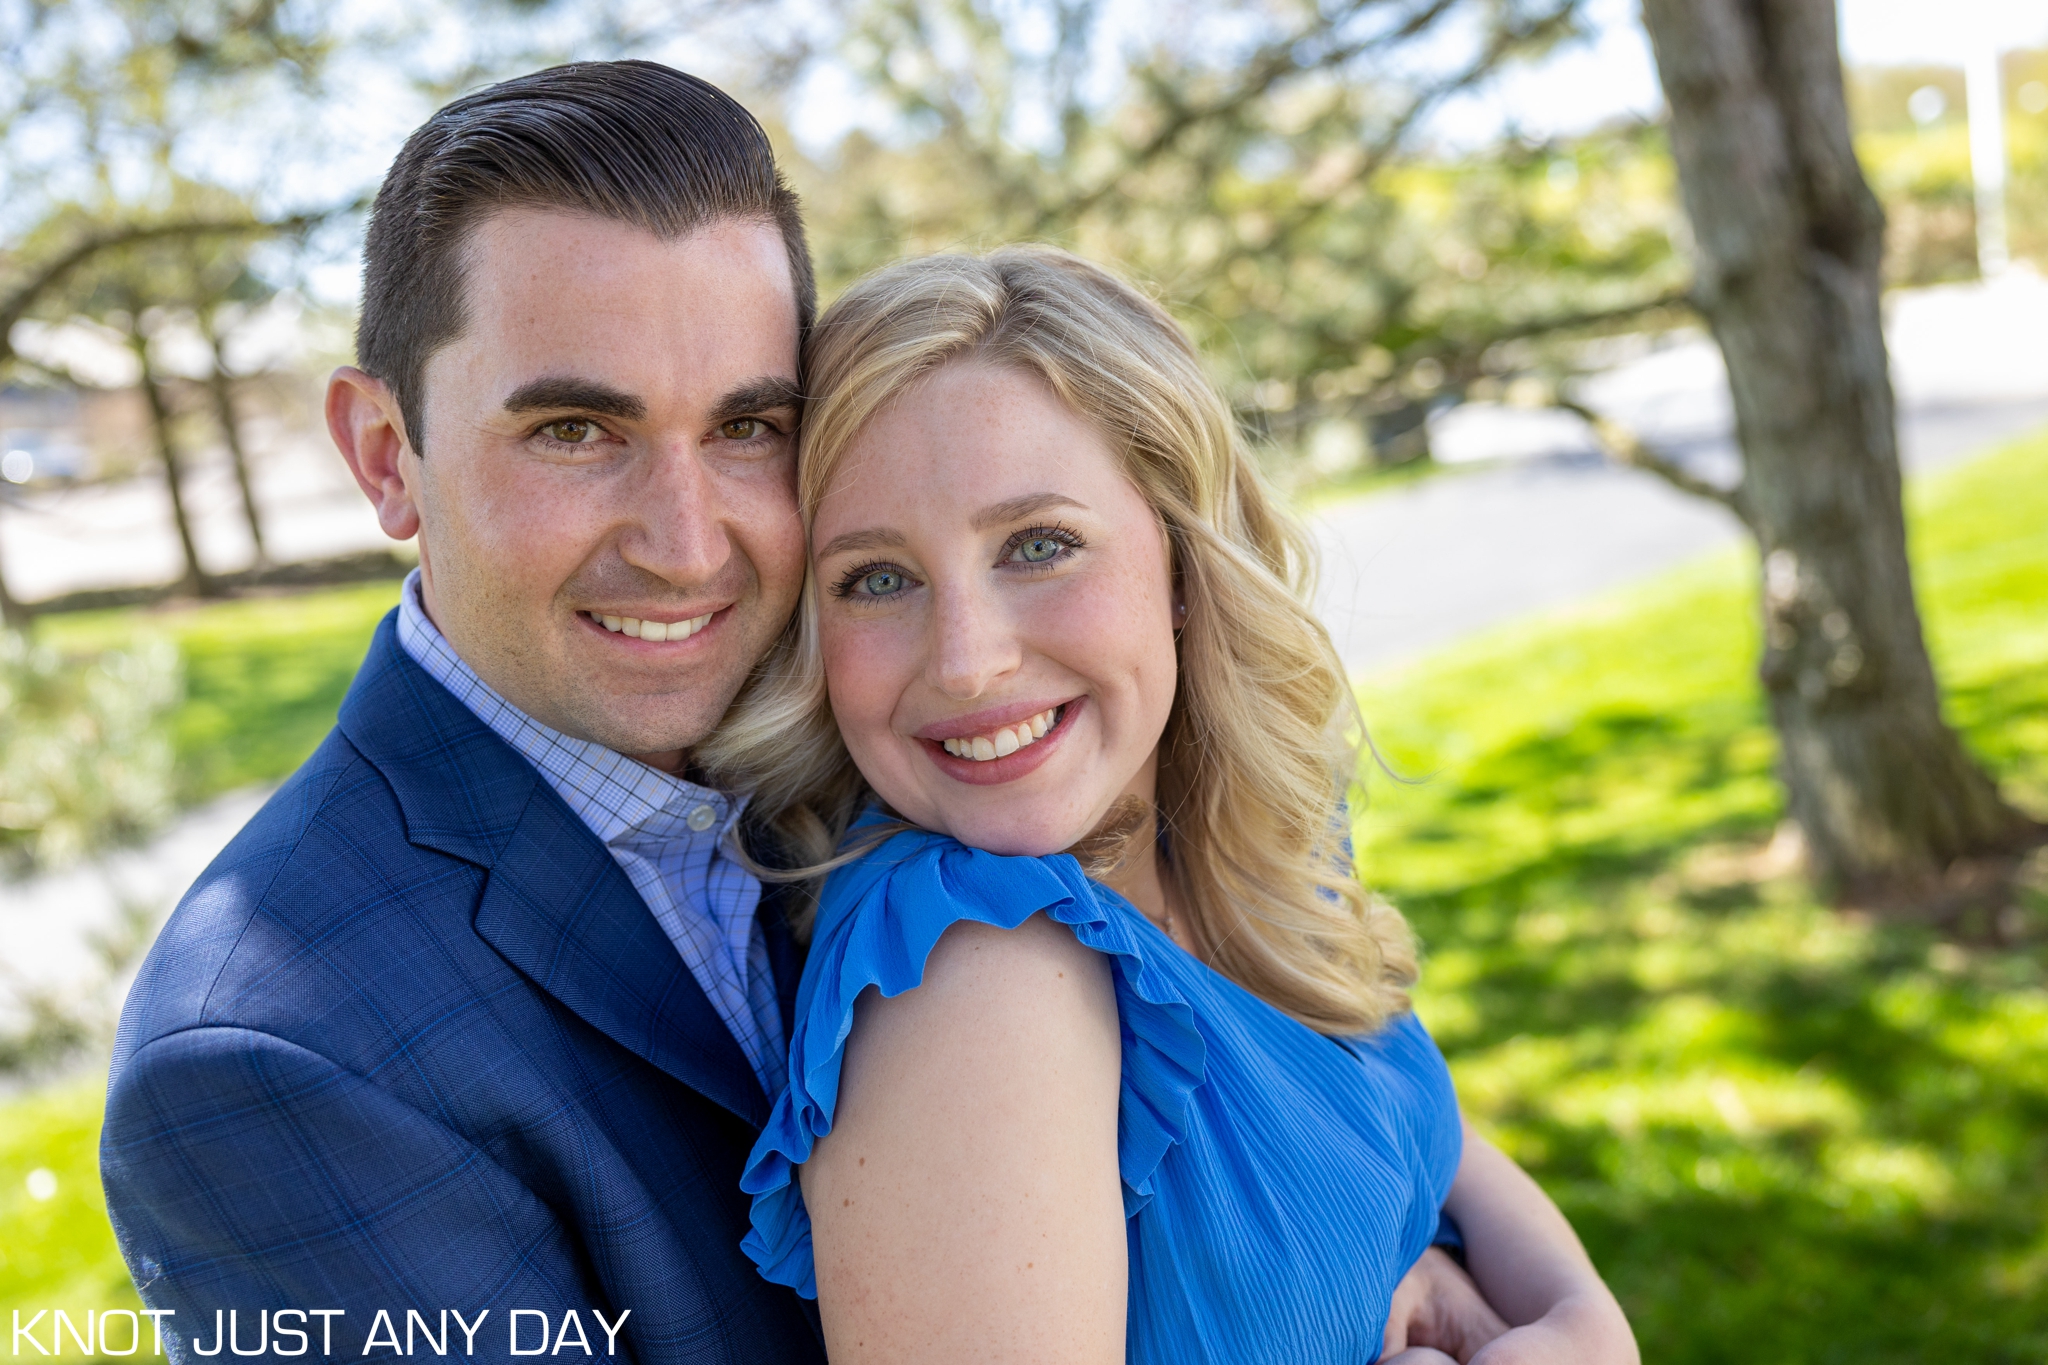 Dallas, PA Spring Engagement Photography Session at Huntsville Golf Club 